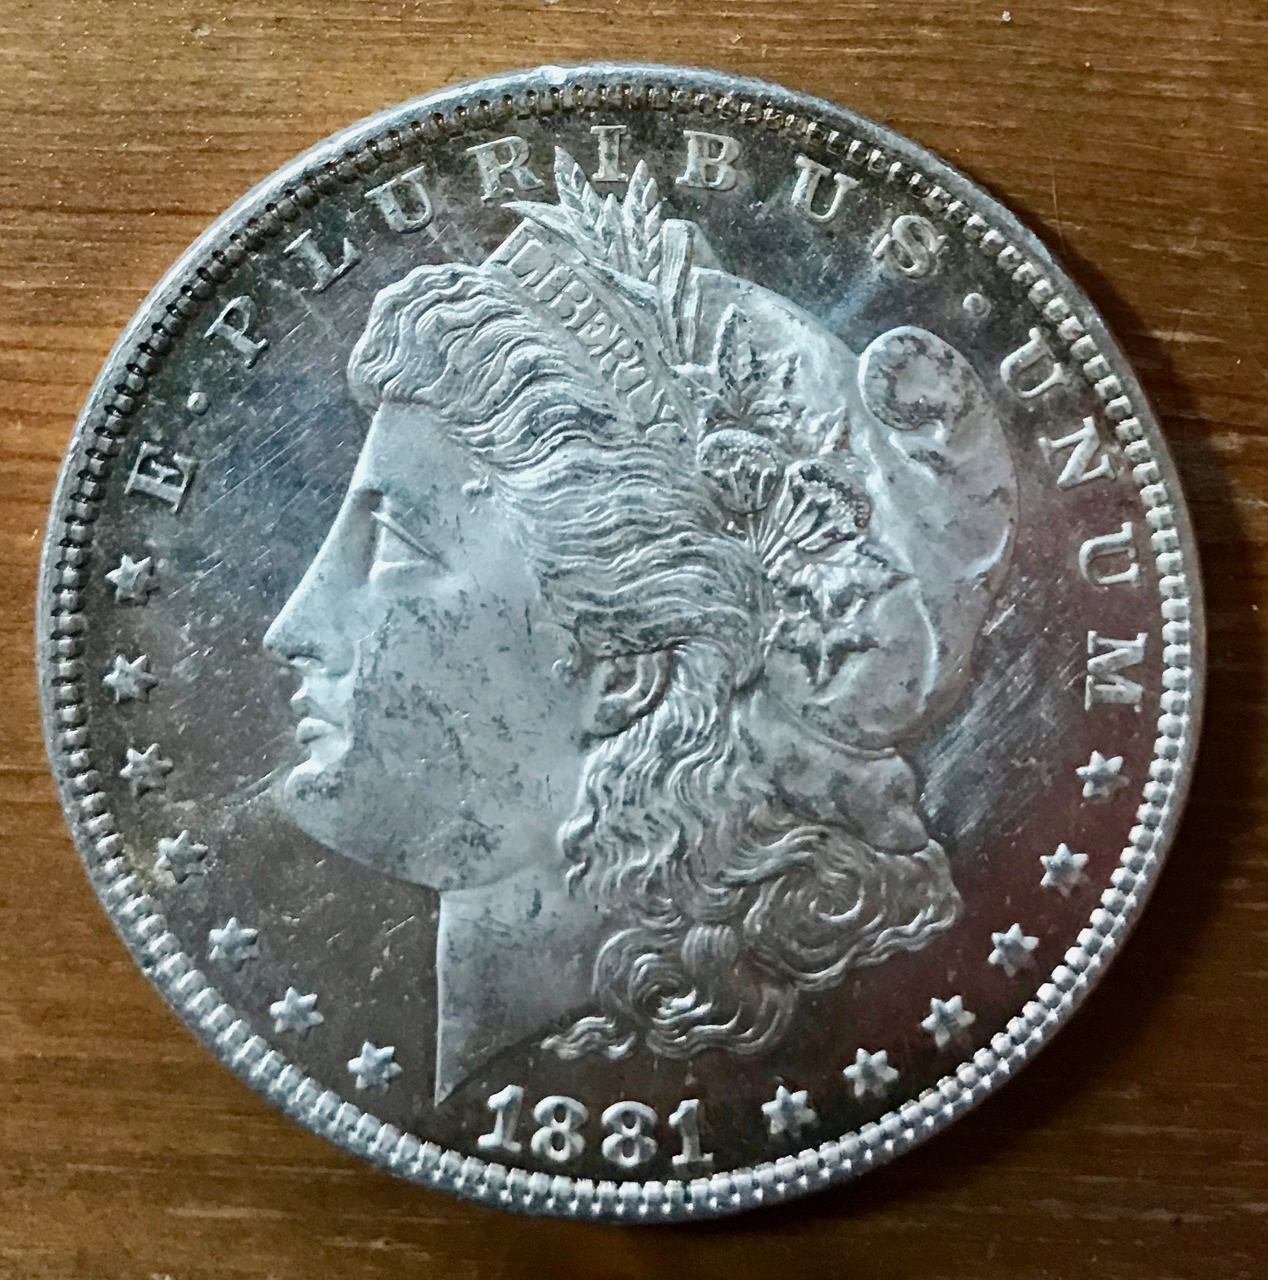 1881 Morgan with rim damage - too significant for PCGS grading